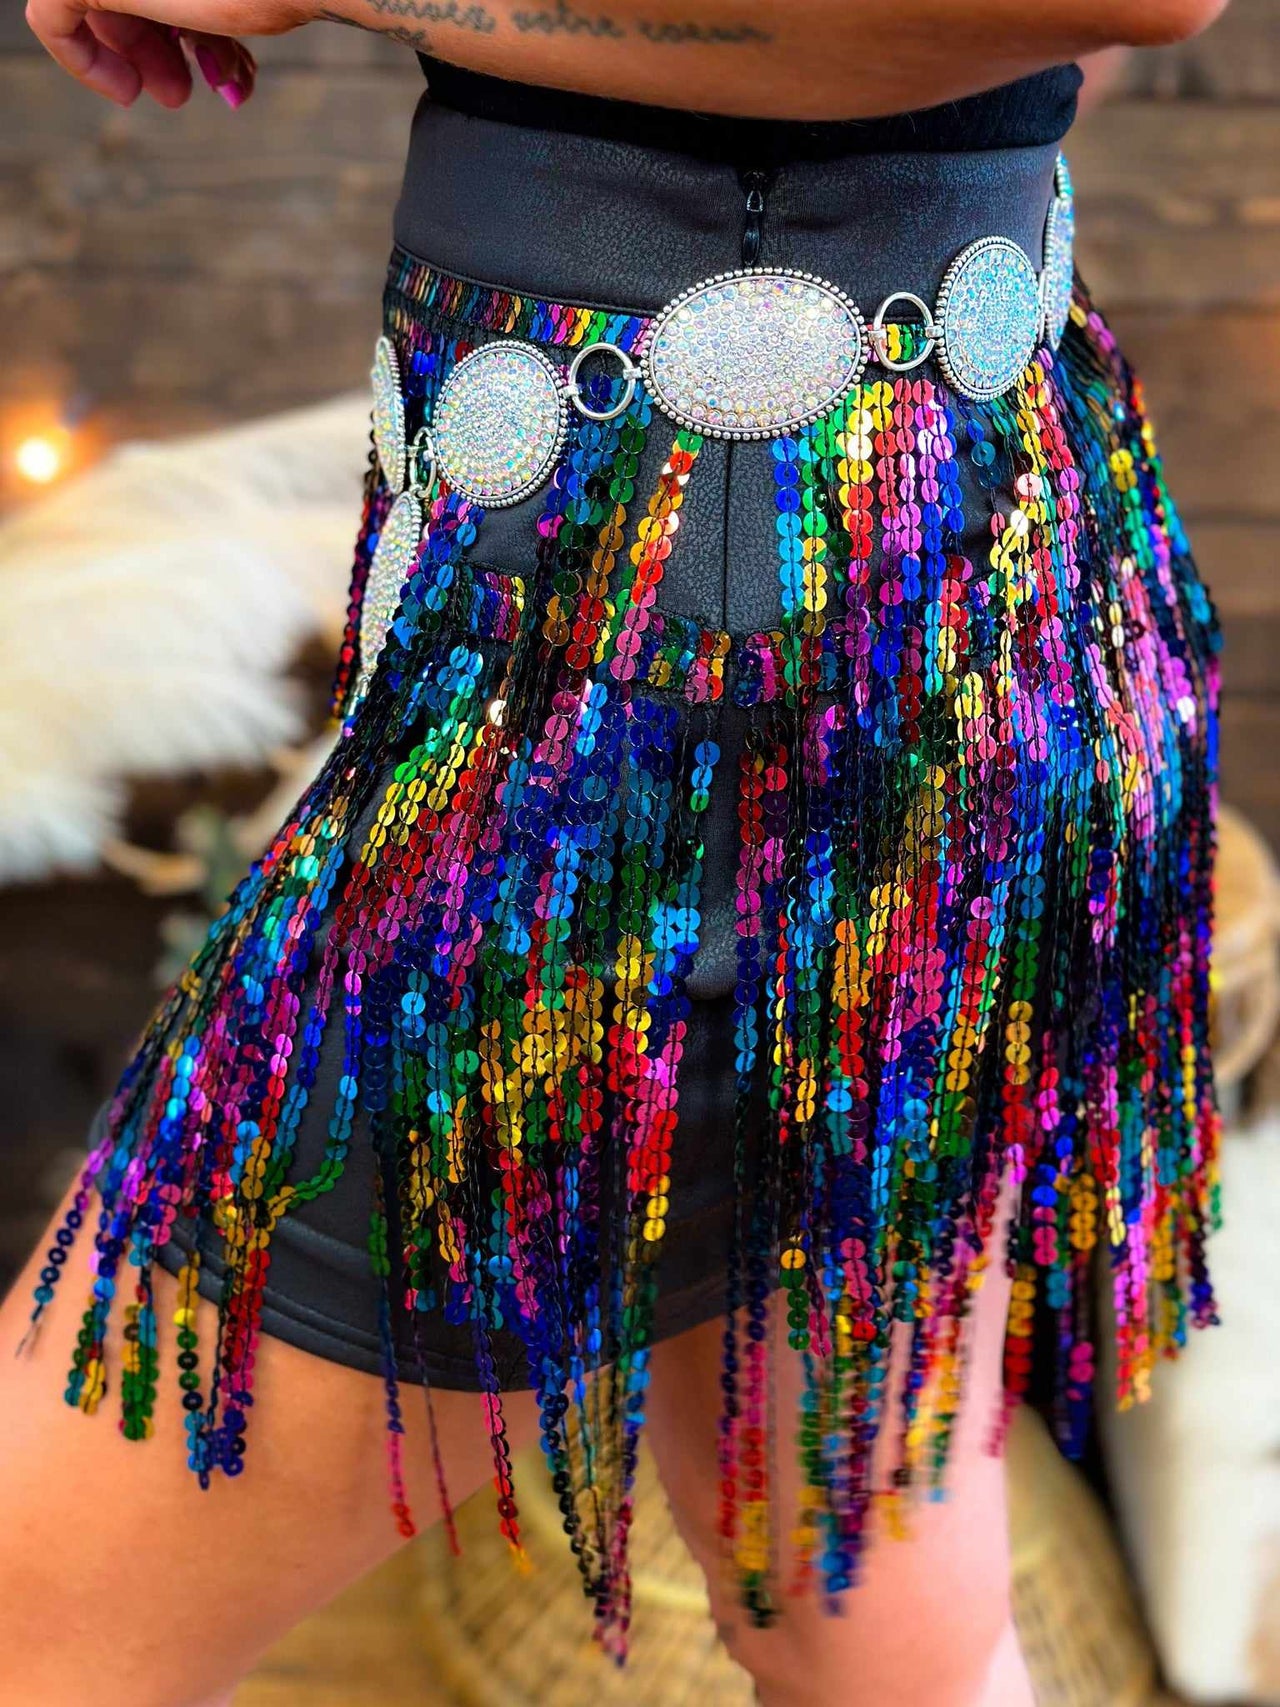 MIni skirt with multi color sequin fringe overlay